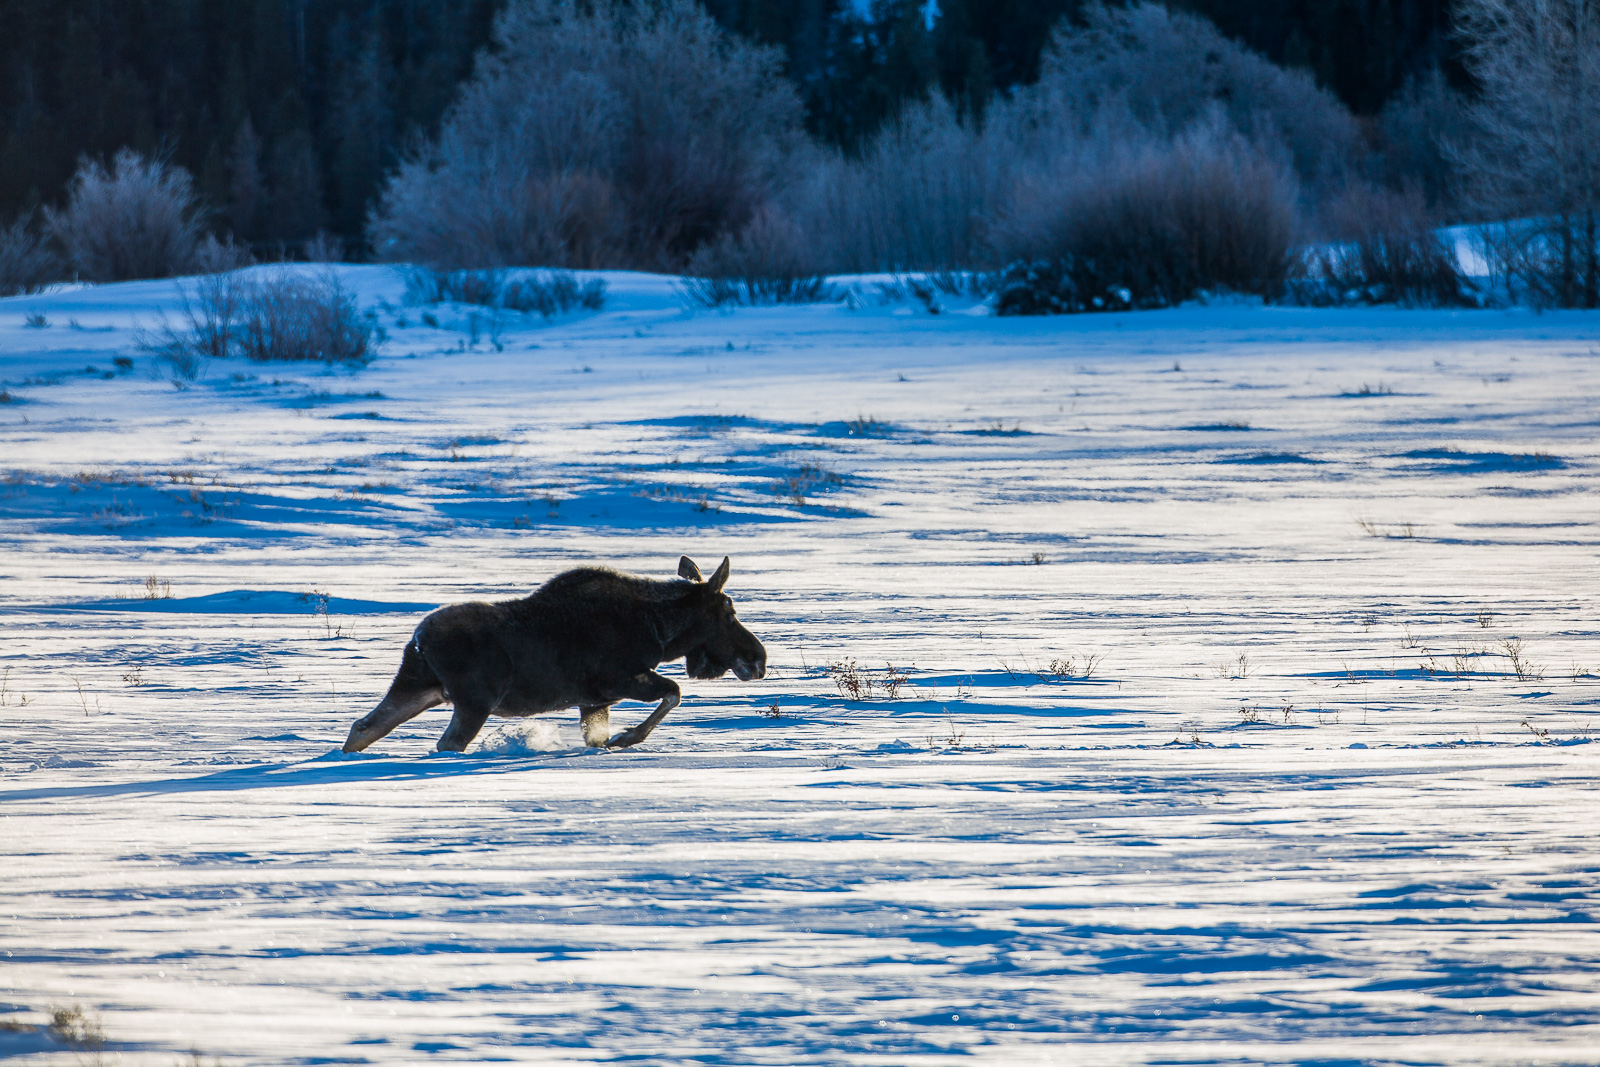 This moose makes way through the deep snow of winter within the Tetons.